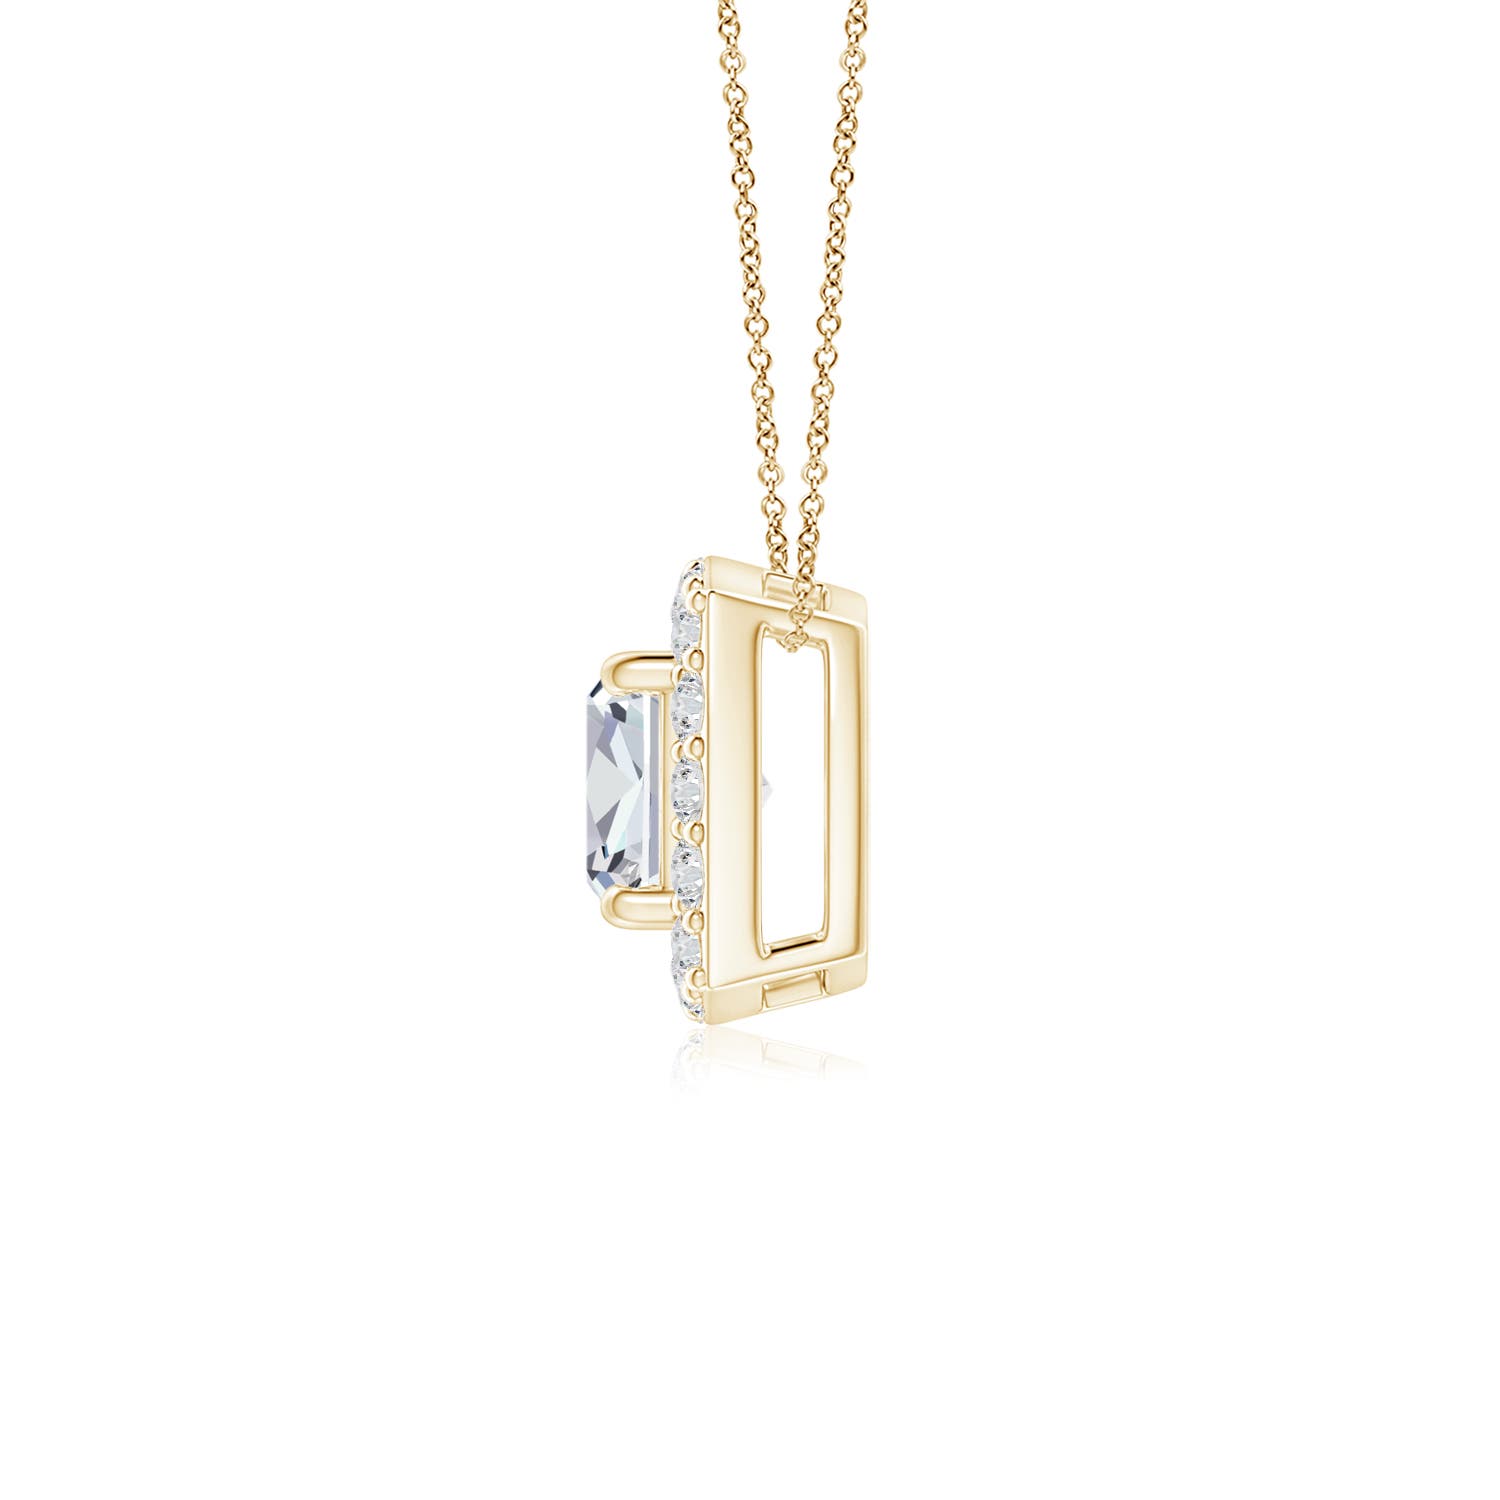 H, SI2 / 0.36 CT / 14 KT Yellow Gold